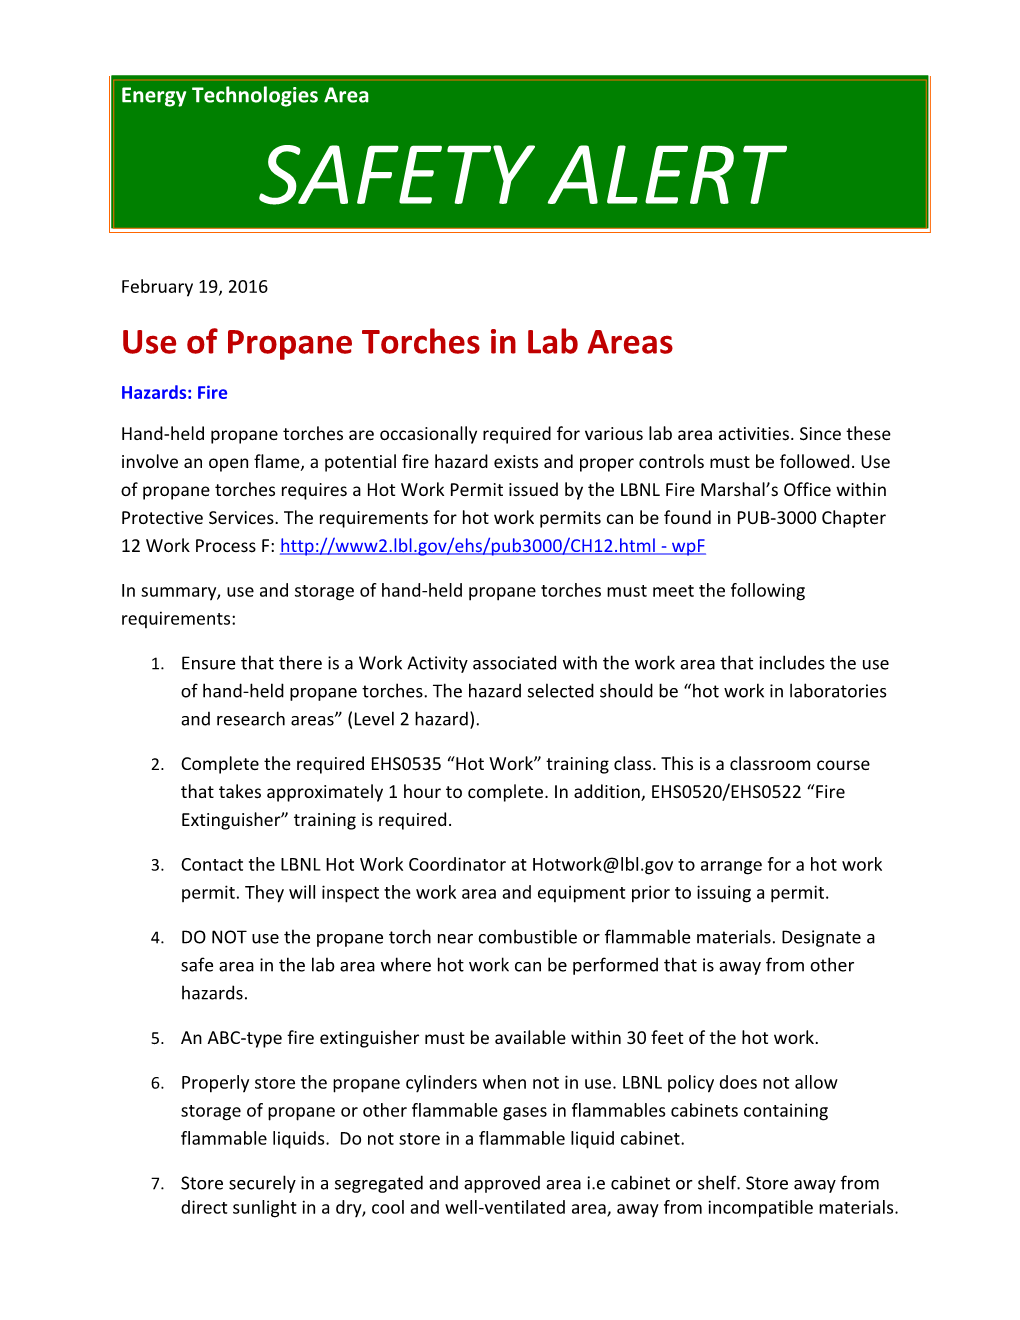 Use of Propane Torches in Lab Areas